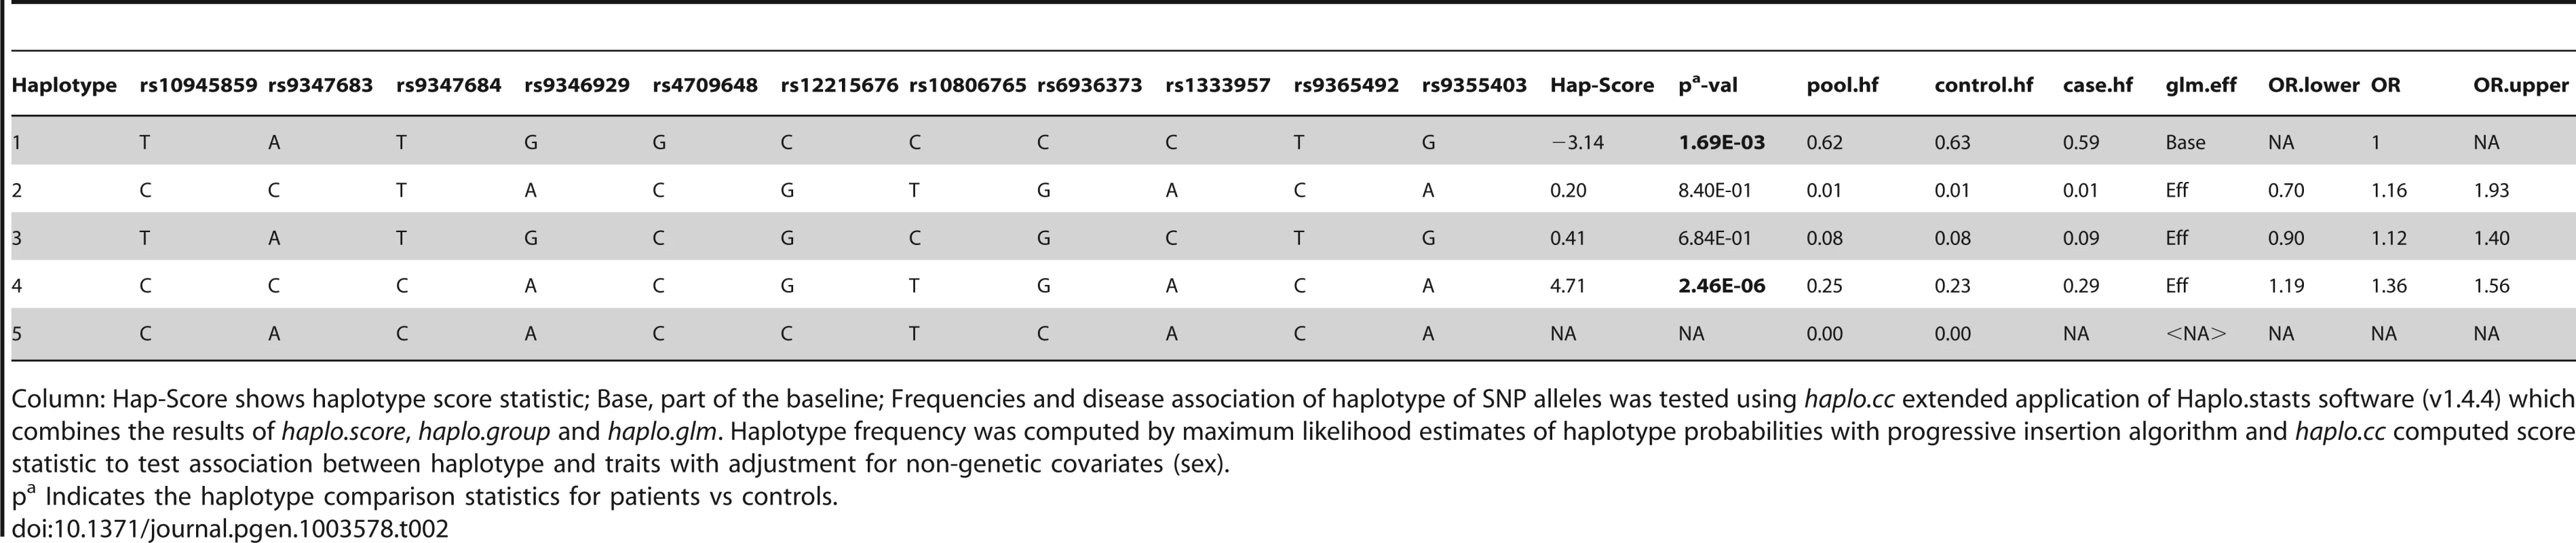 Haplotype structure, haplotype frequencies, significant <i>p</i> values and odds ratio between patients versus healthy controls of 11 significantly associated SNPs.